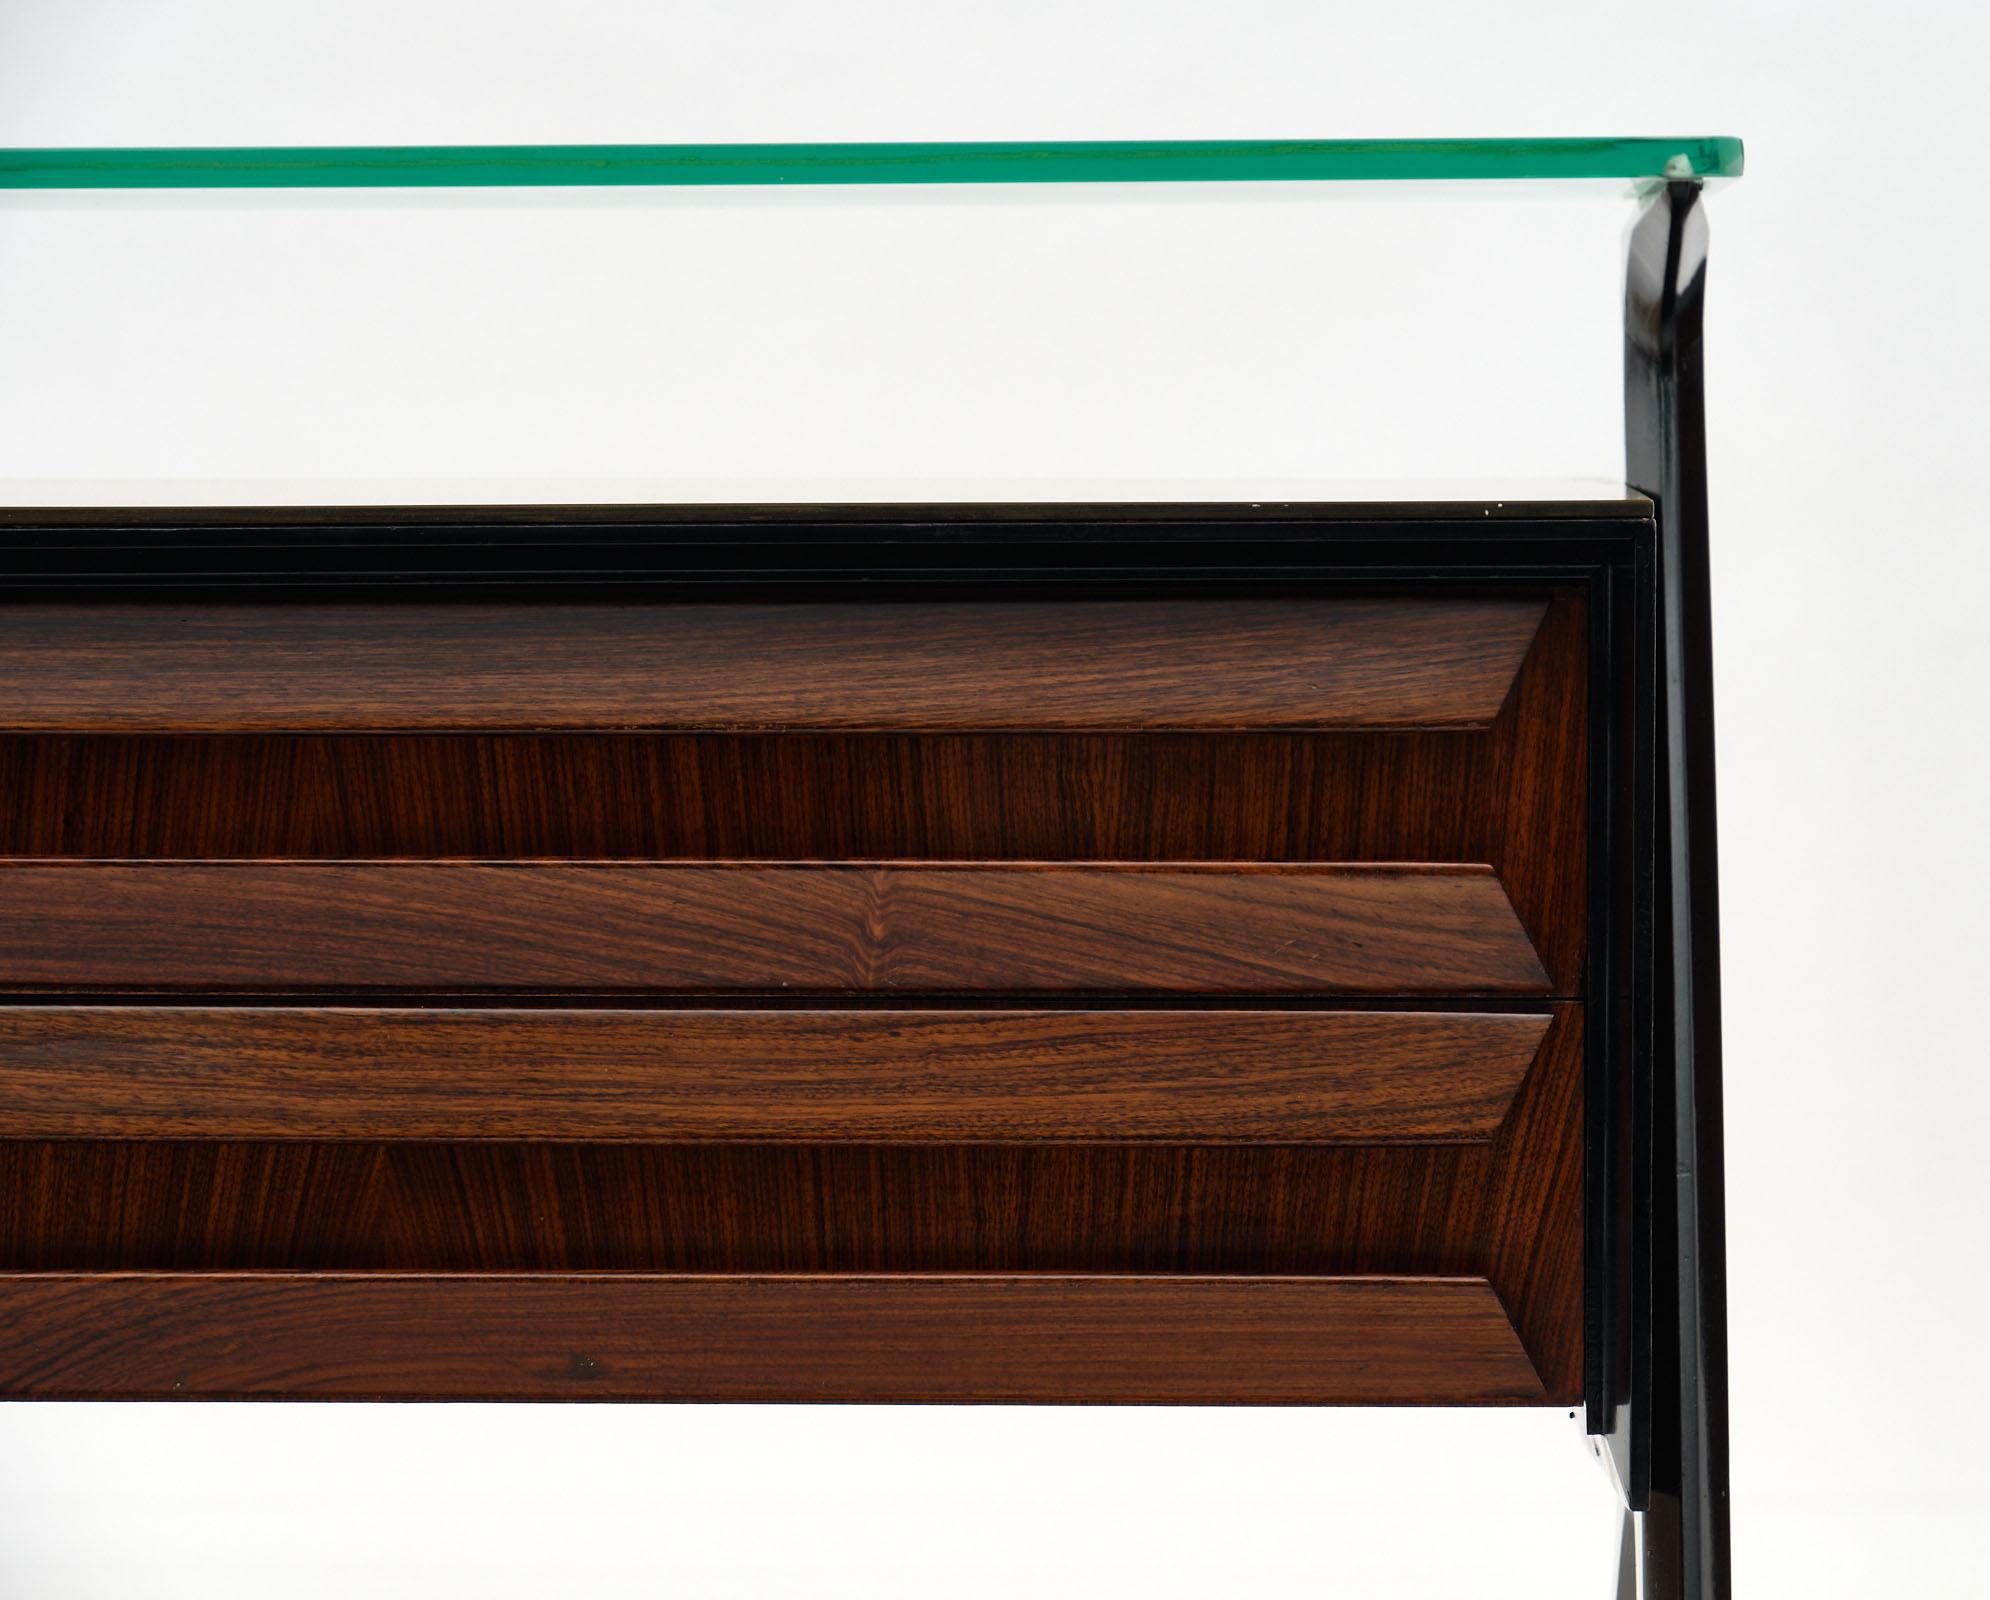 Midcentury Italian Console Table in the Manner of Ico Parisi (Mitte des 20. Jahrhunderts)